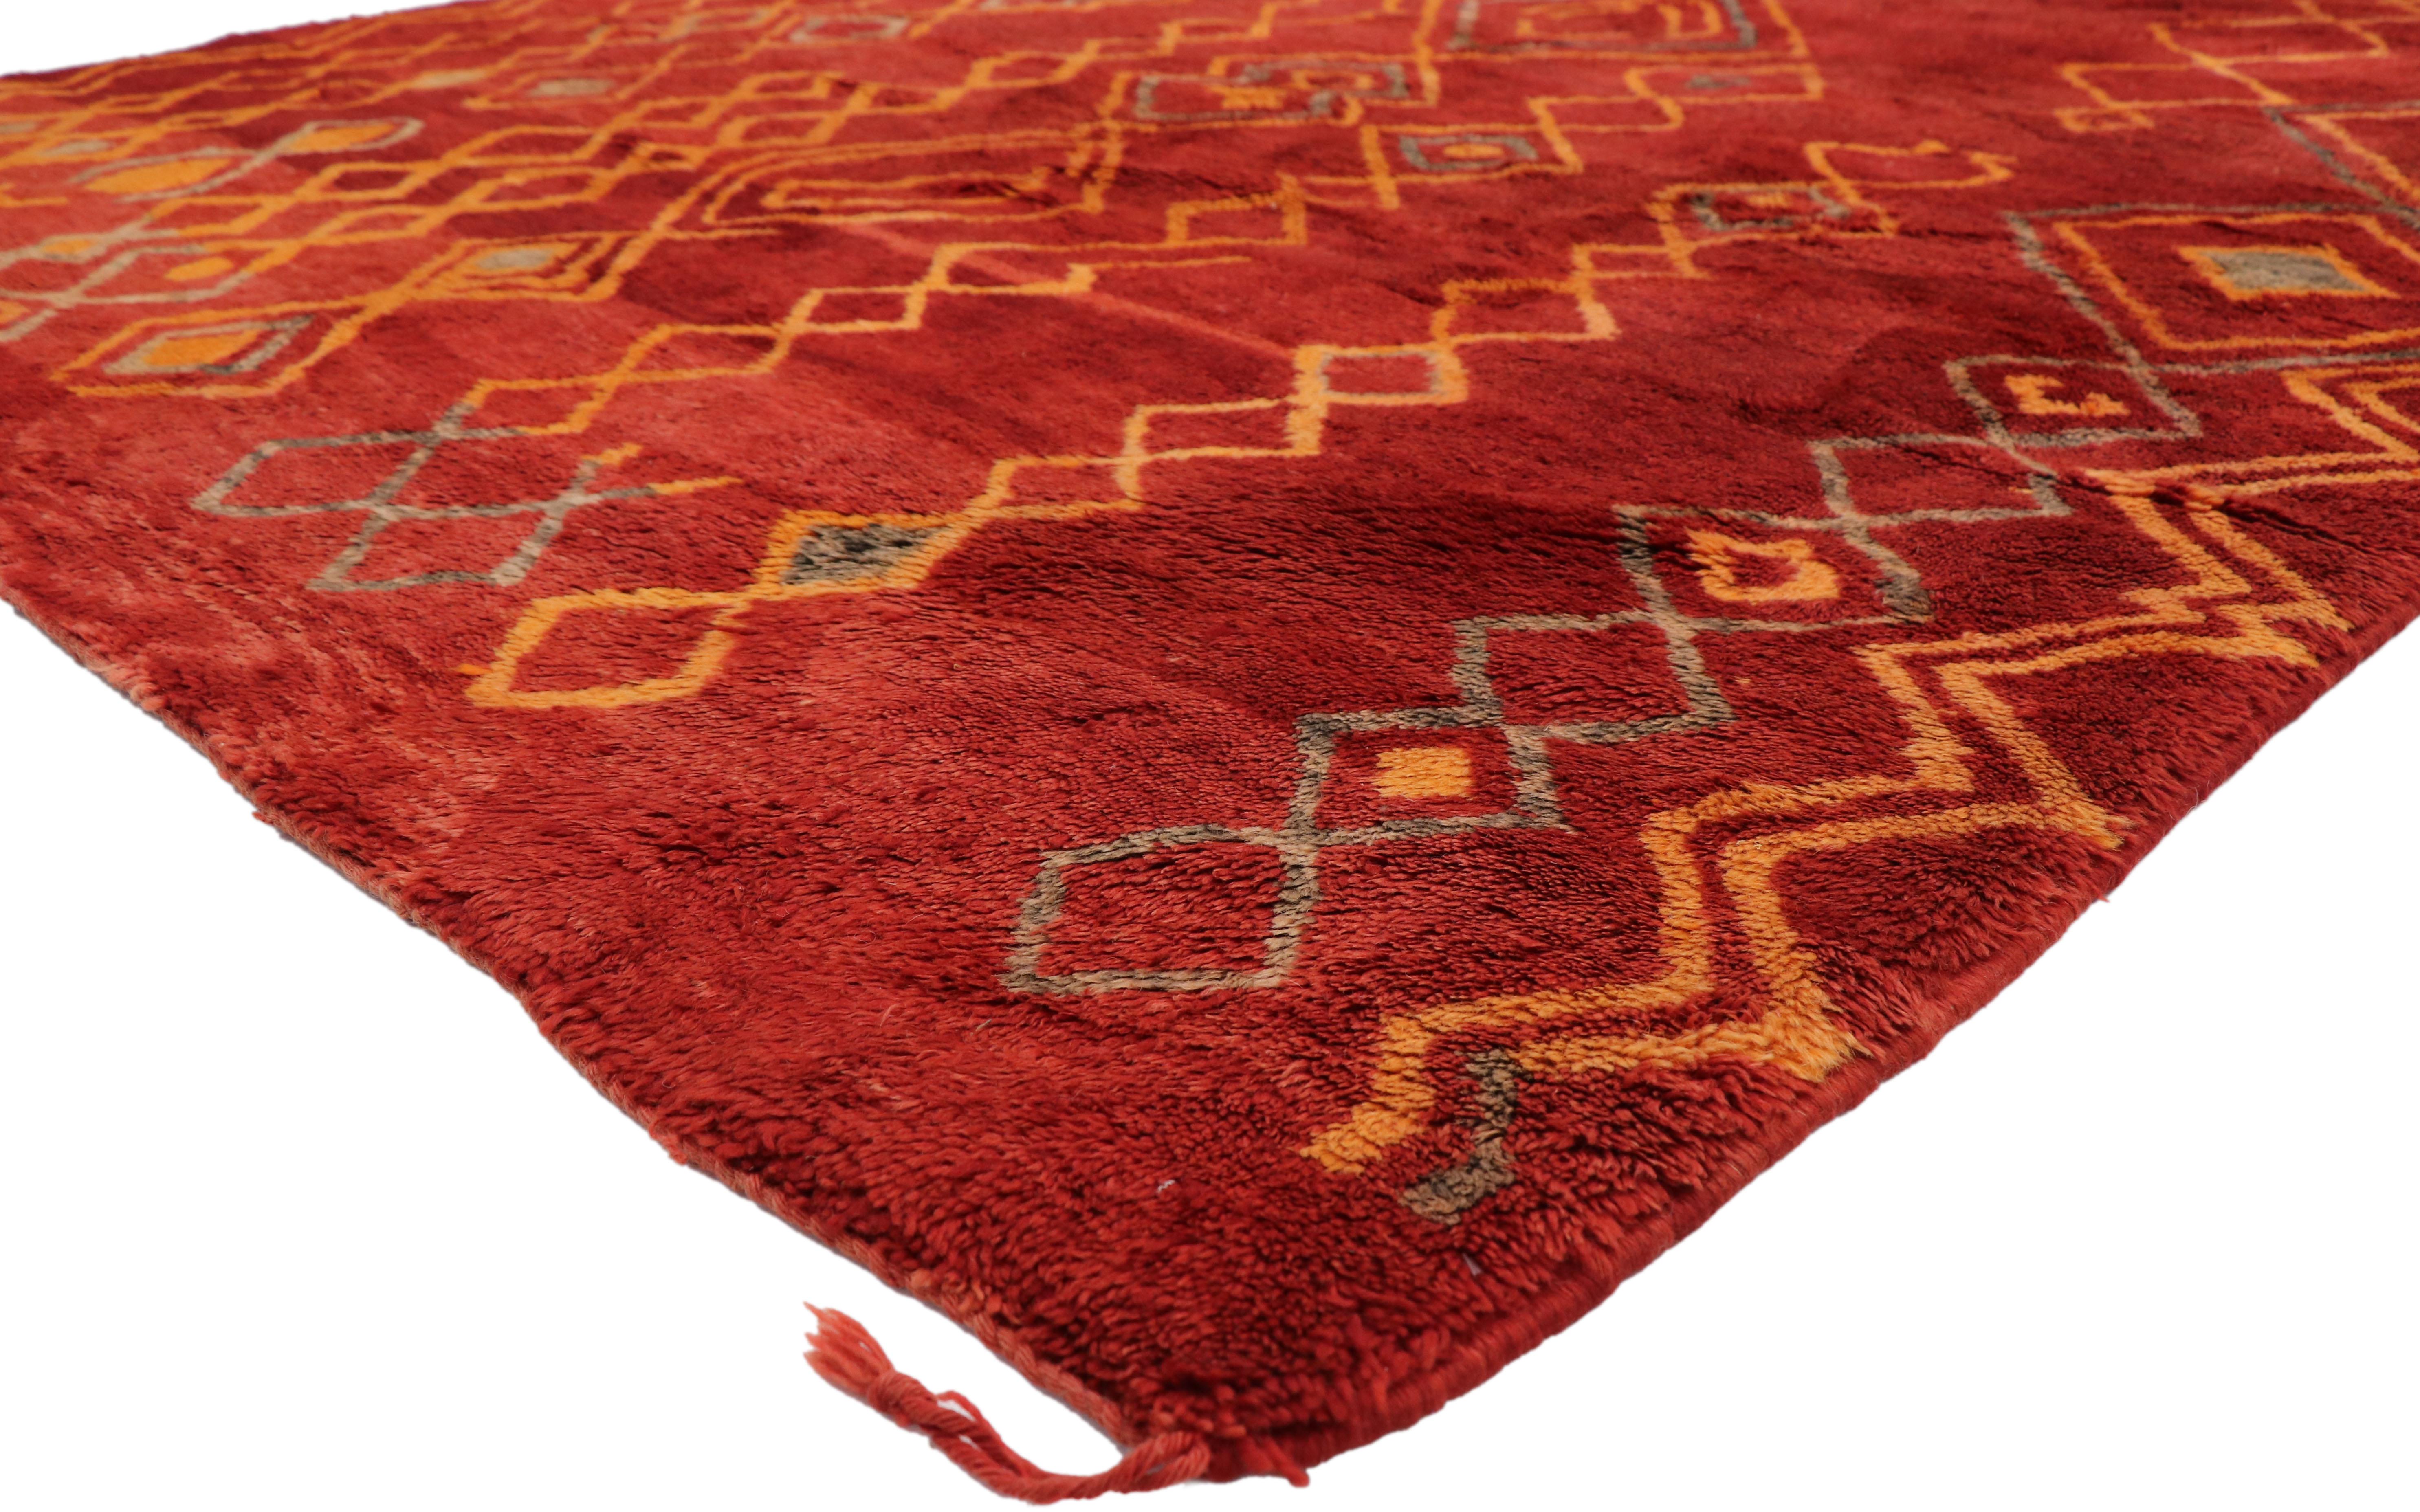 20897, vintage red Beni Mrirt carpet, Berber Moroccan rug 06'10 x 10'07. Featuring a luminous fiery glow, rich waves of abrash and luxury underfoot and this hand knotted wool vintage red Moroccan Beni Mrirt rug is bursting with chromatic brilliancy